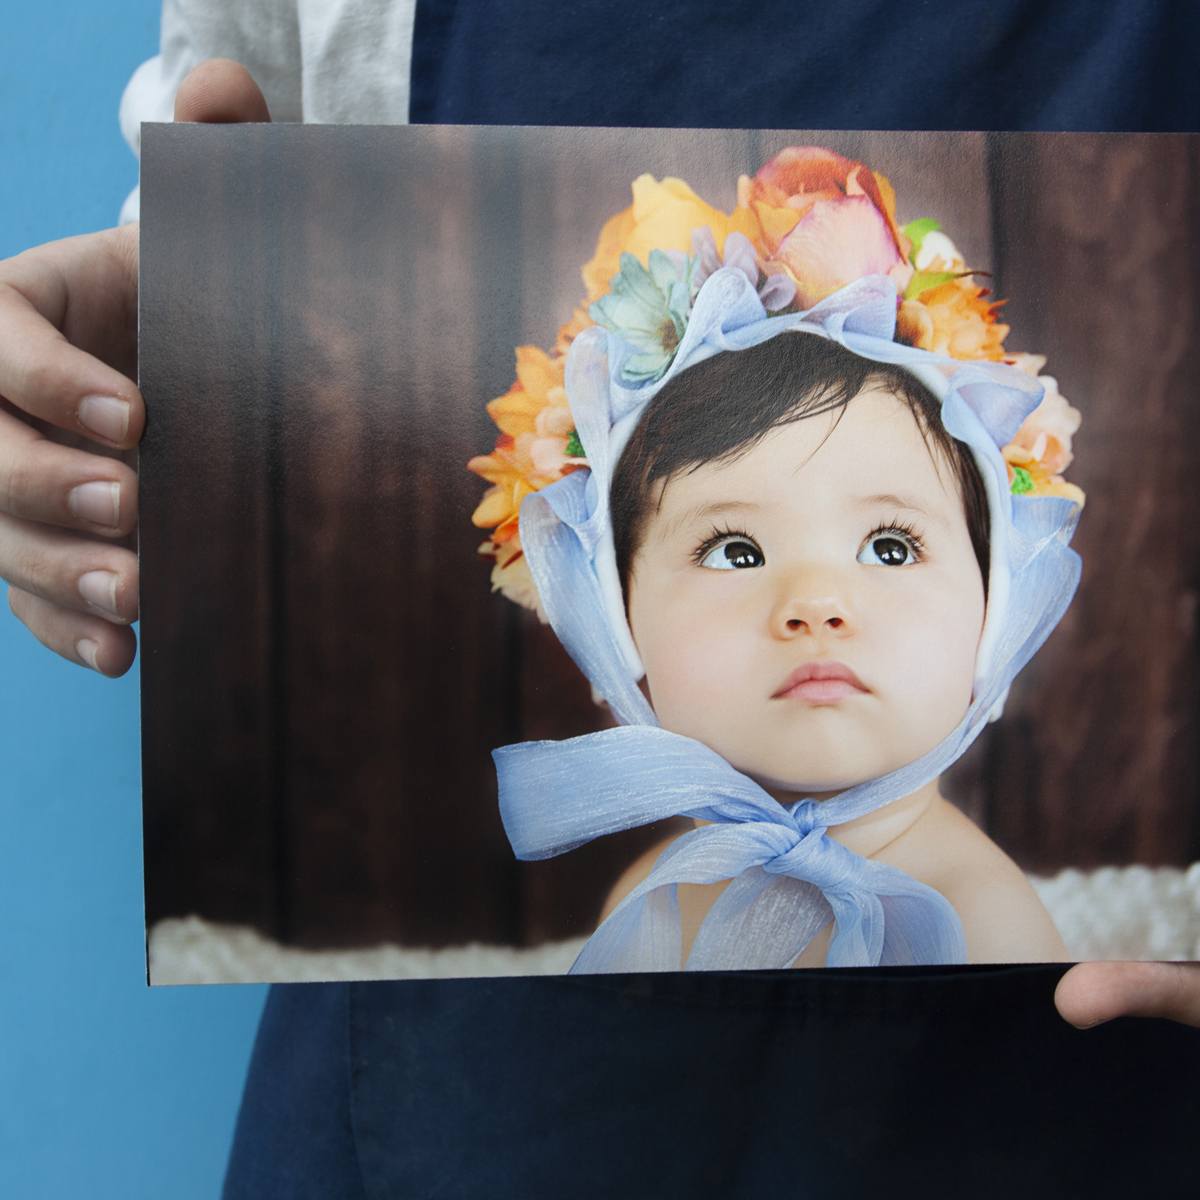 Lab staff hold and image of a baby printed on Ilford Gold Fibre Gloss